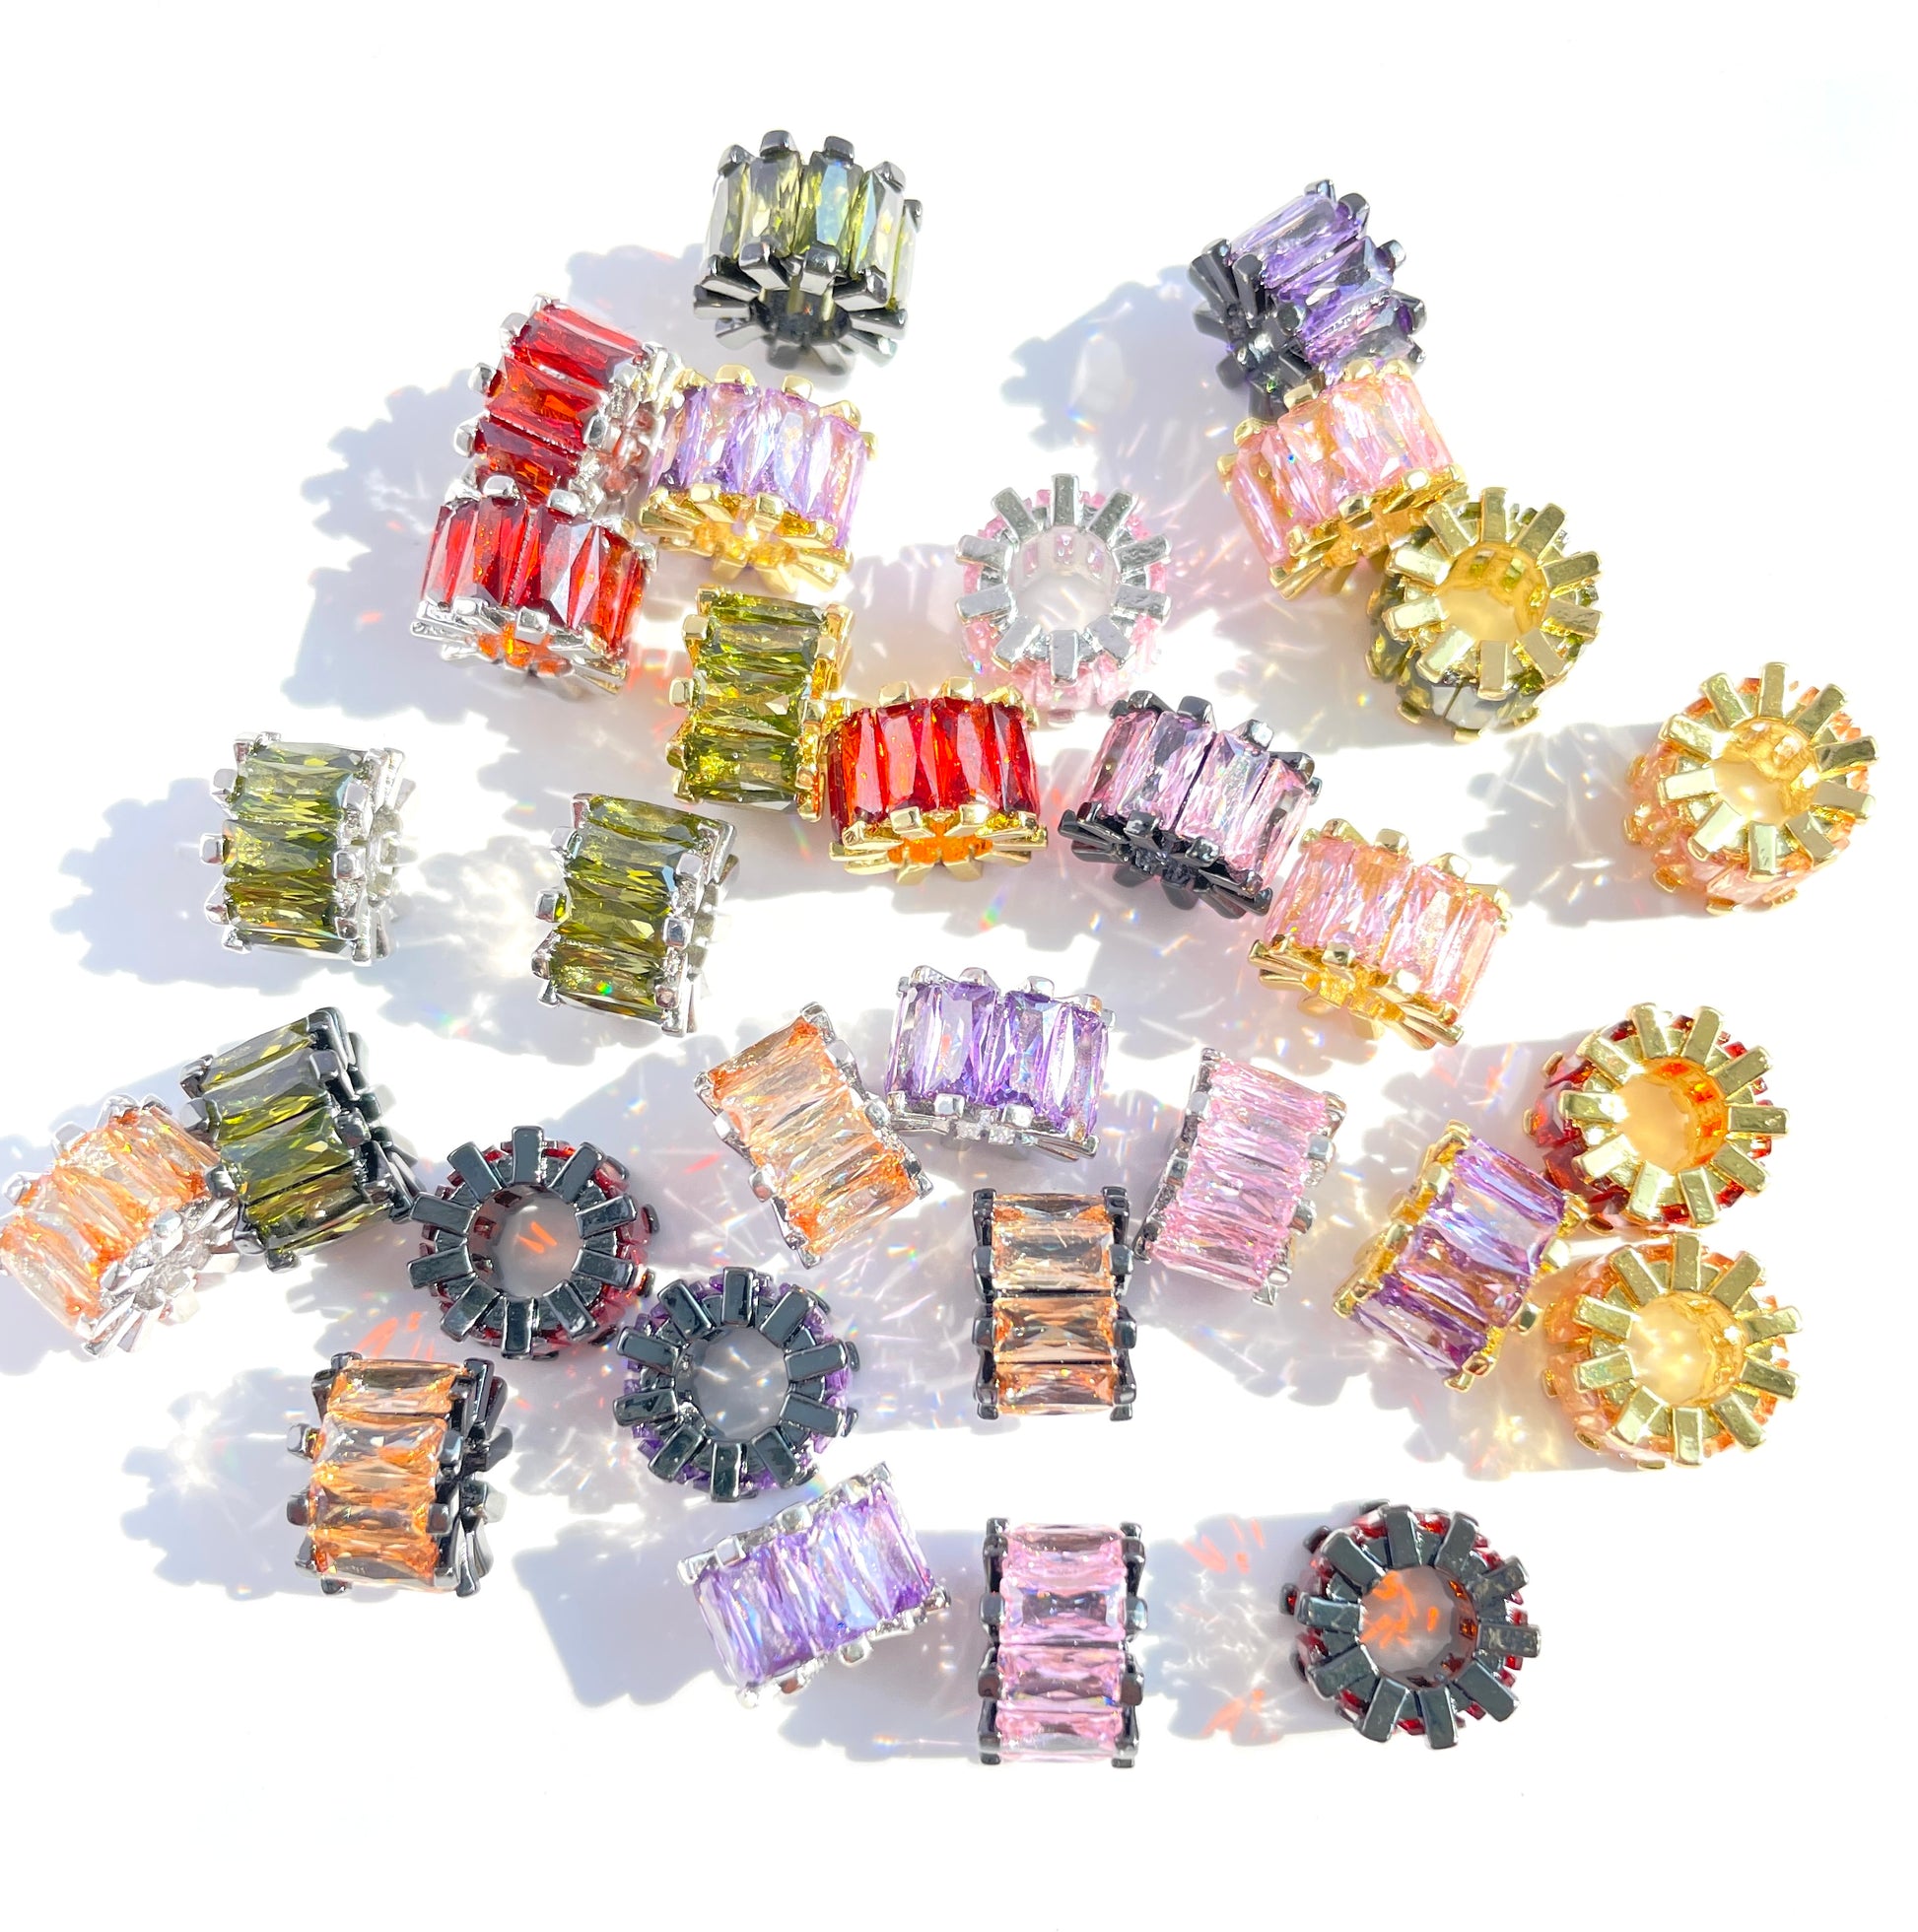 10pcs/lot 9.5*6.4mm Multicolor CZ Paved Big Hole Spacers Mix Random Colors CZ Paved Spacers Big Hole Beads New Spacers Arrivals Charms Beads Beyond